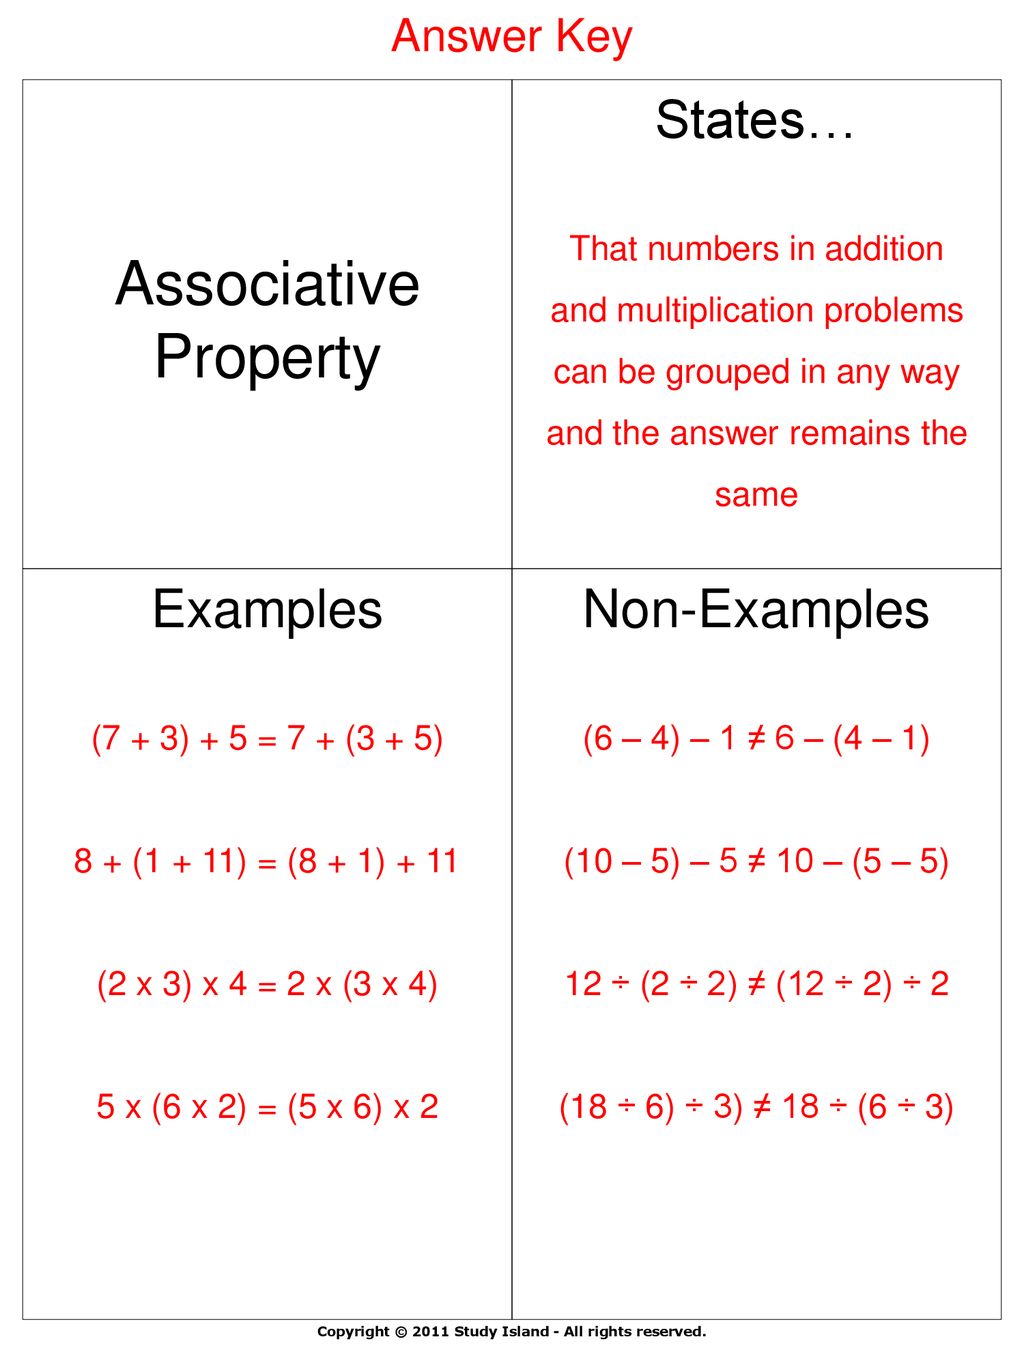 States Associative Property Examples Non Examples Ppt Download